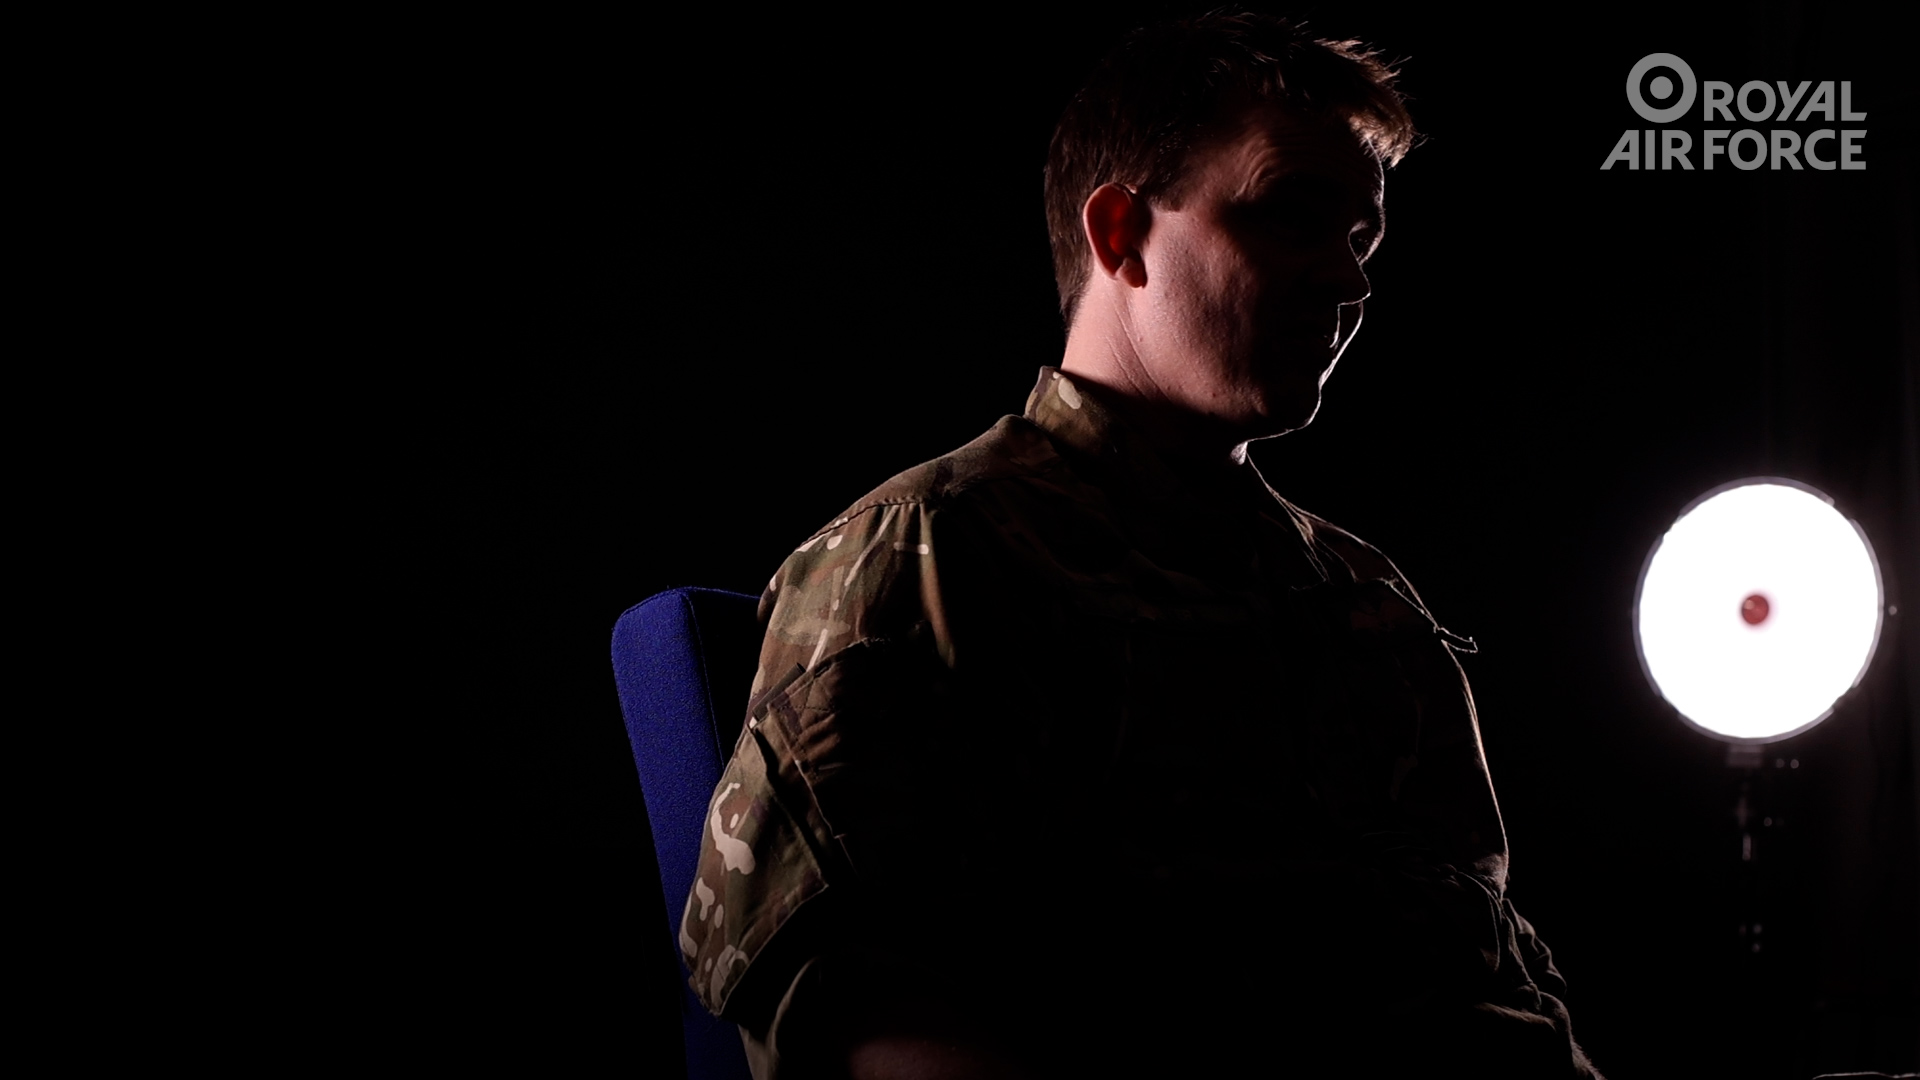 Seated male wearing military uniform in a dimly lit room with a spotlight.